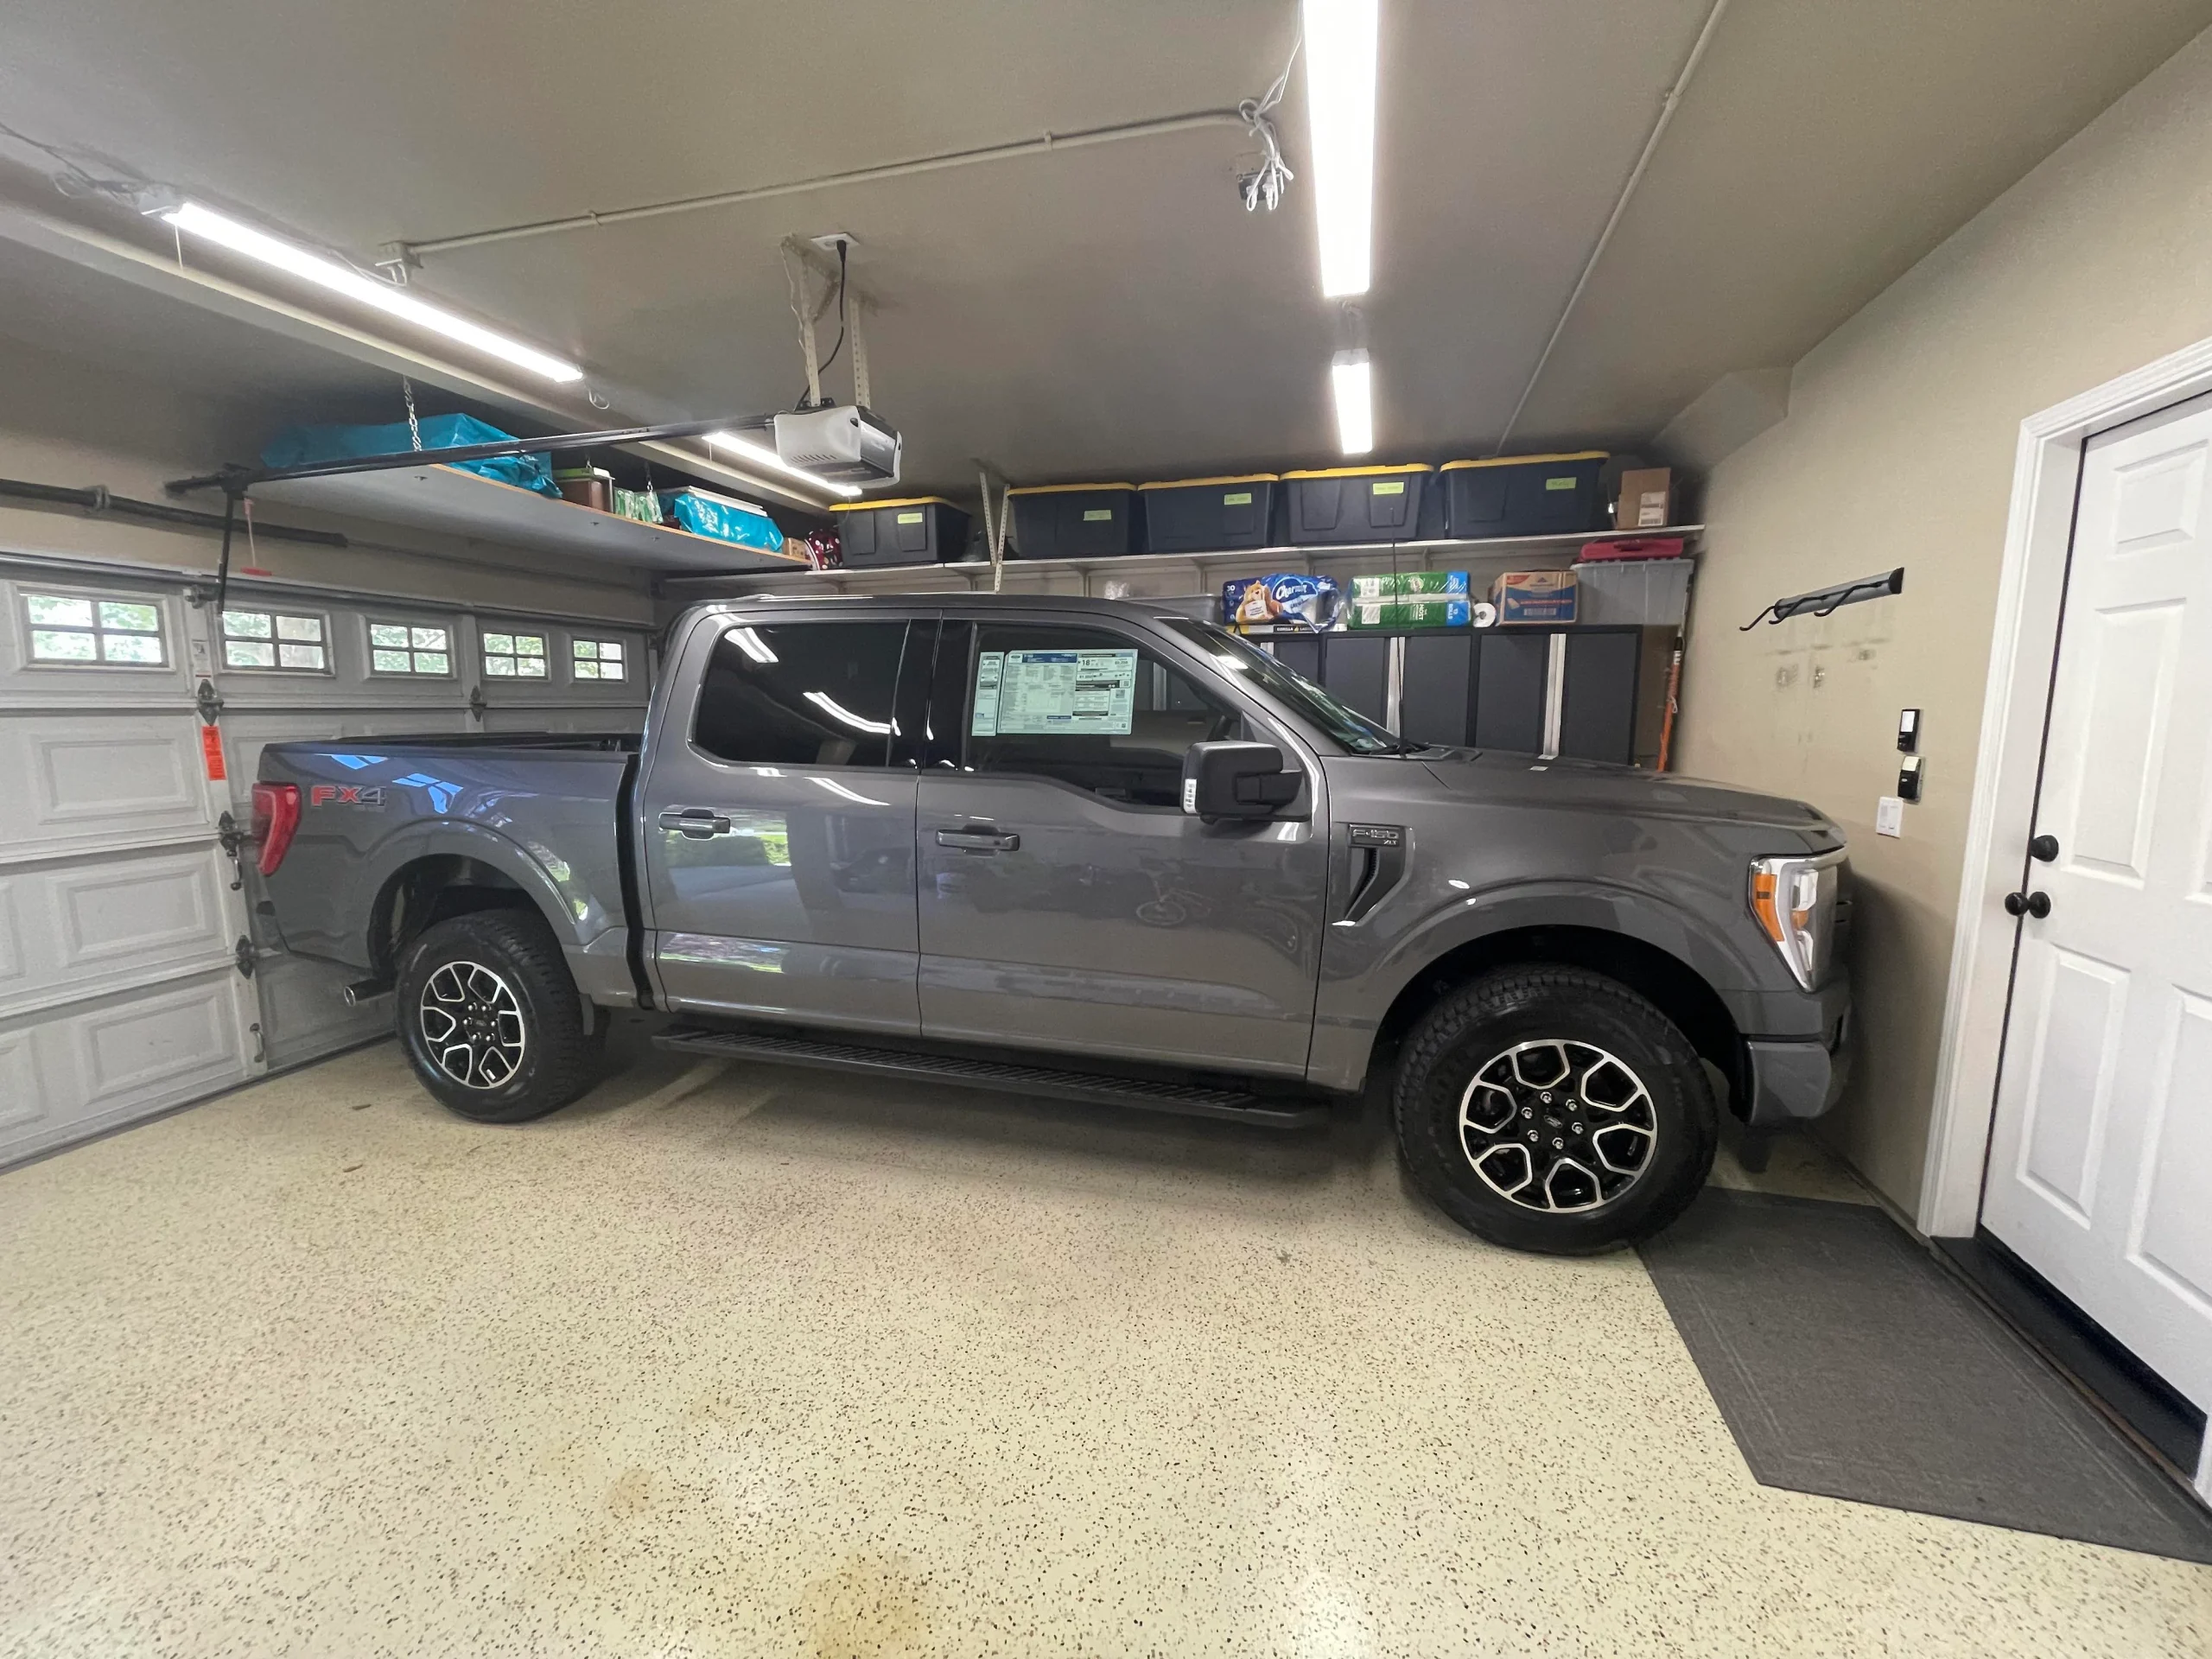 How to Program Your F150 Garage Door Opener Without the Remote